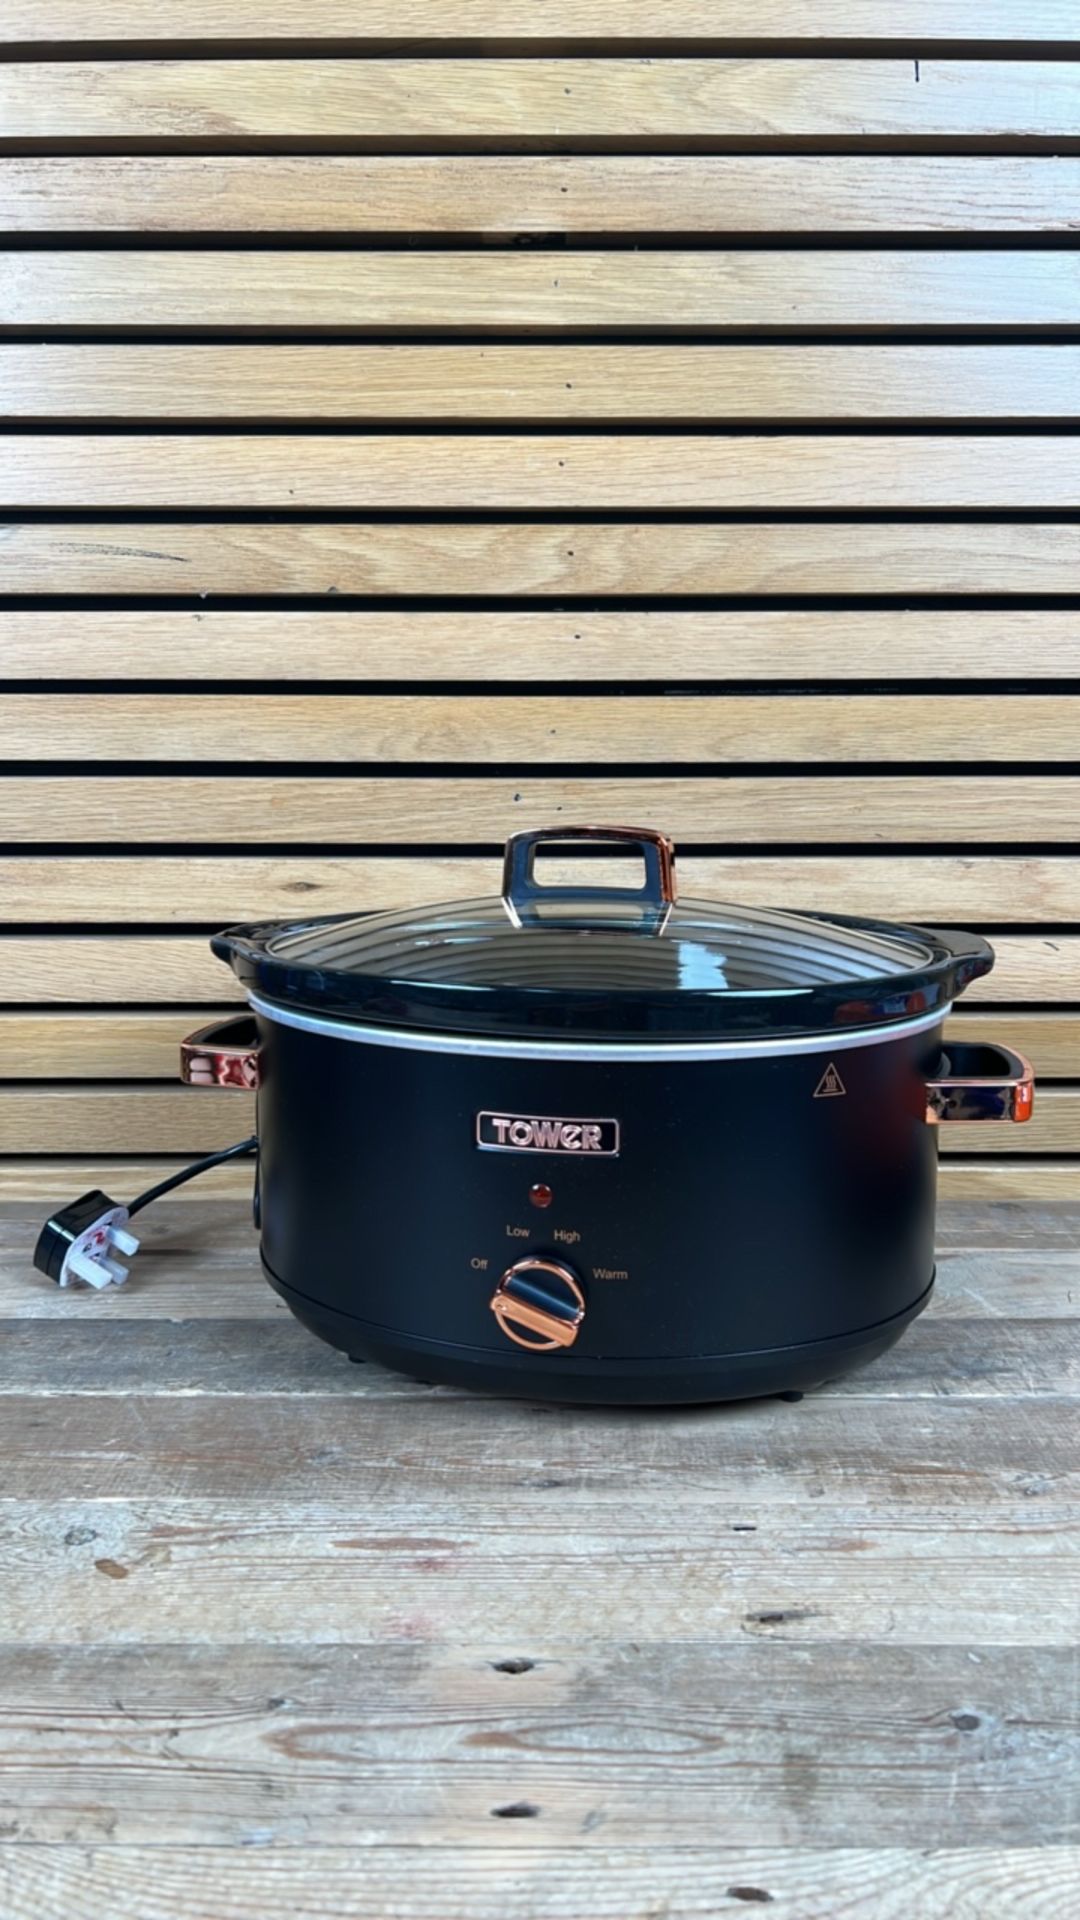 Tower Cavaletto Rose Gold Edition 6.5Litre Black Slow Cooker